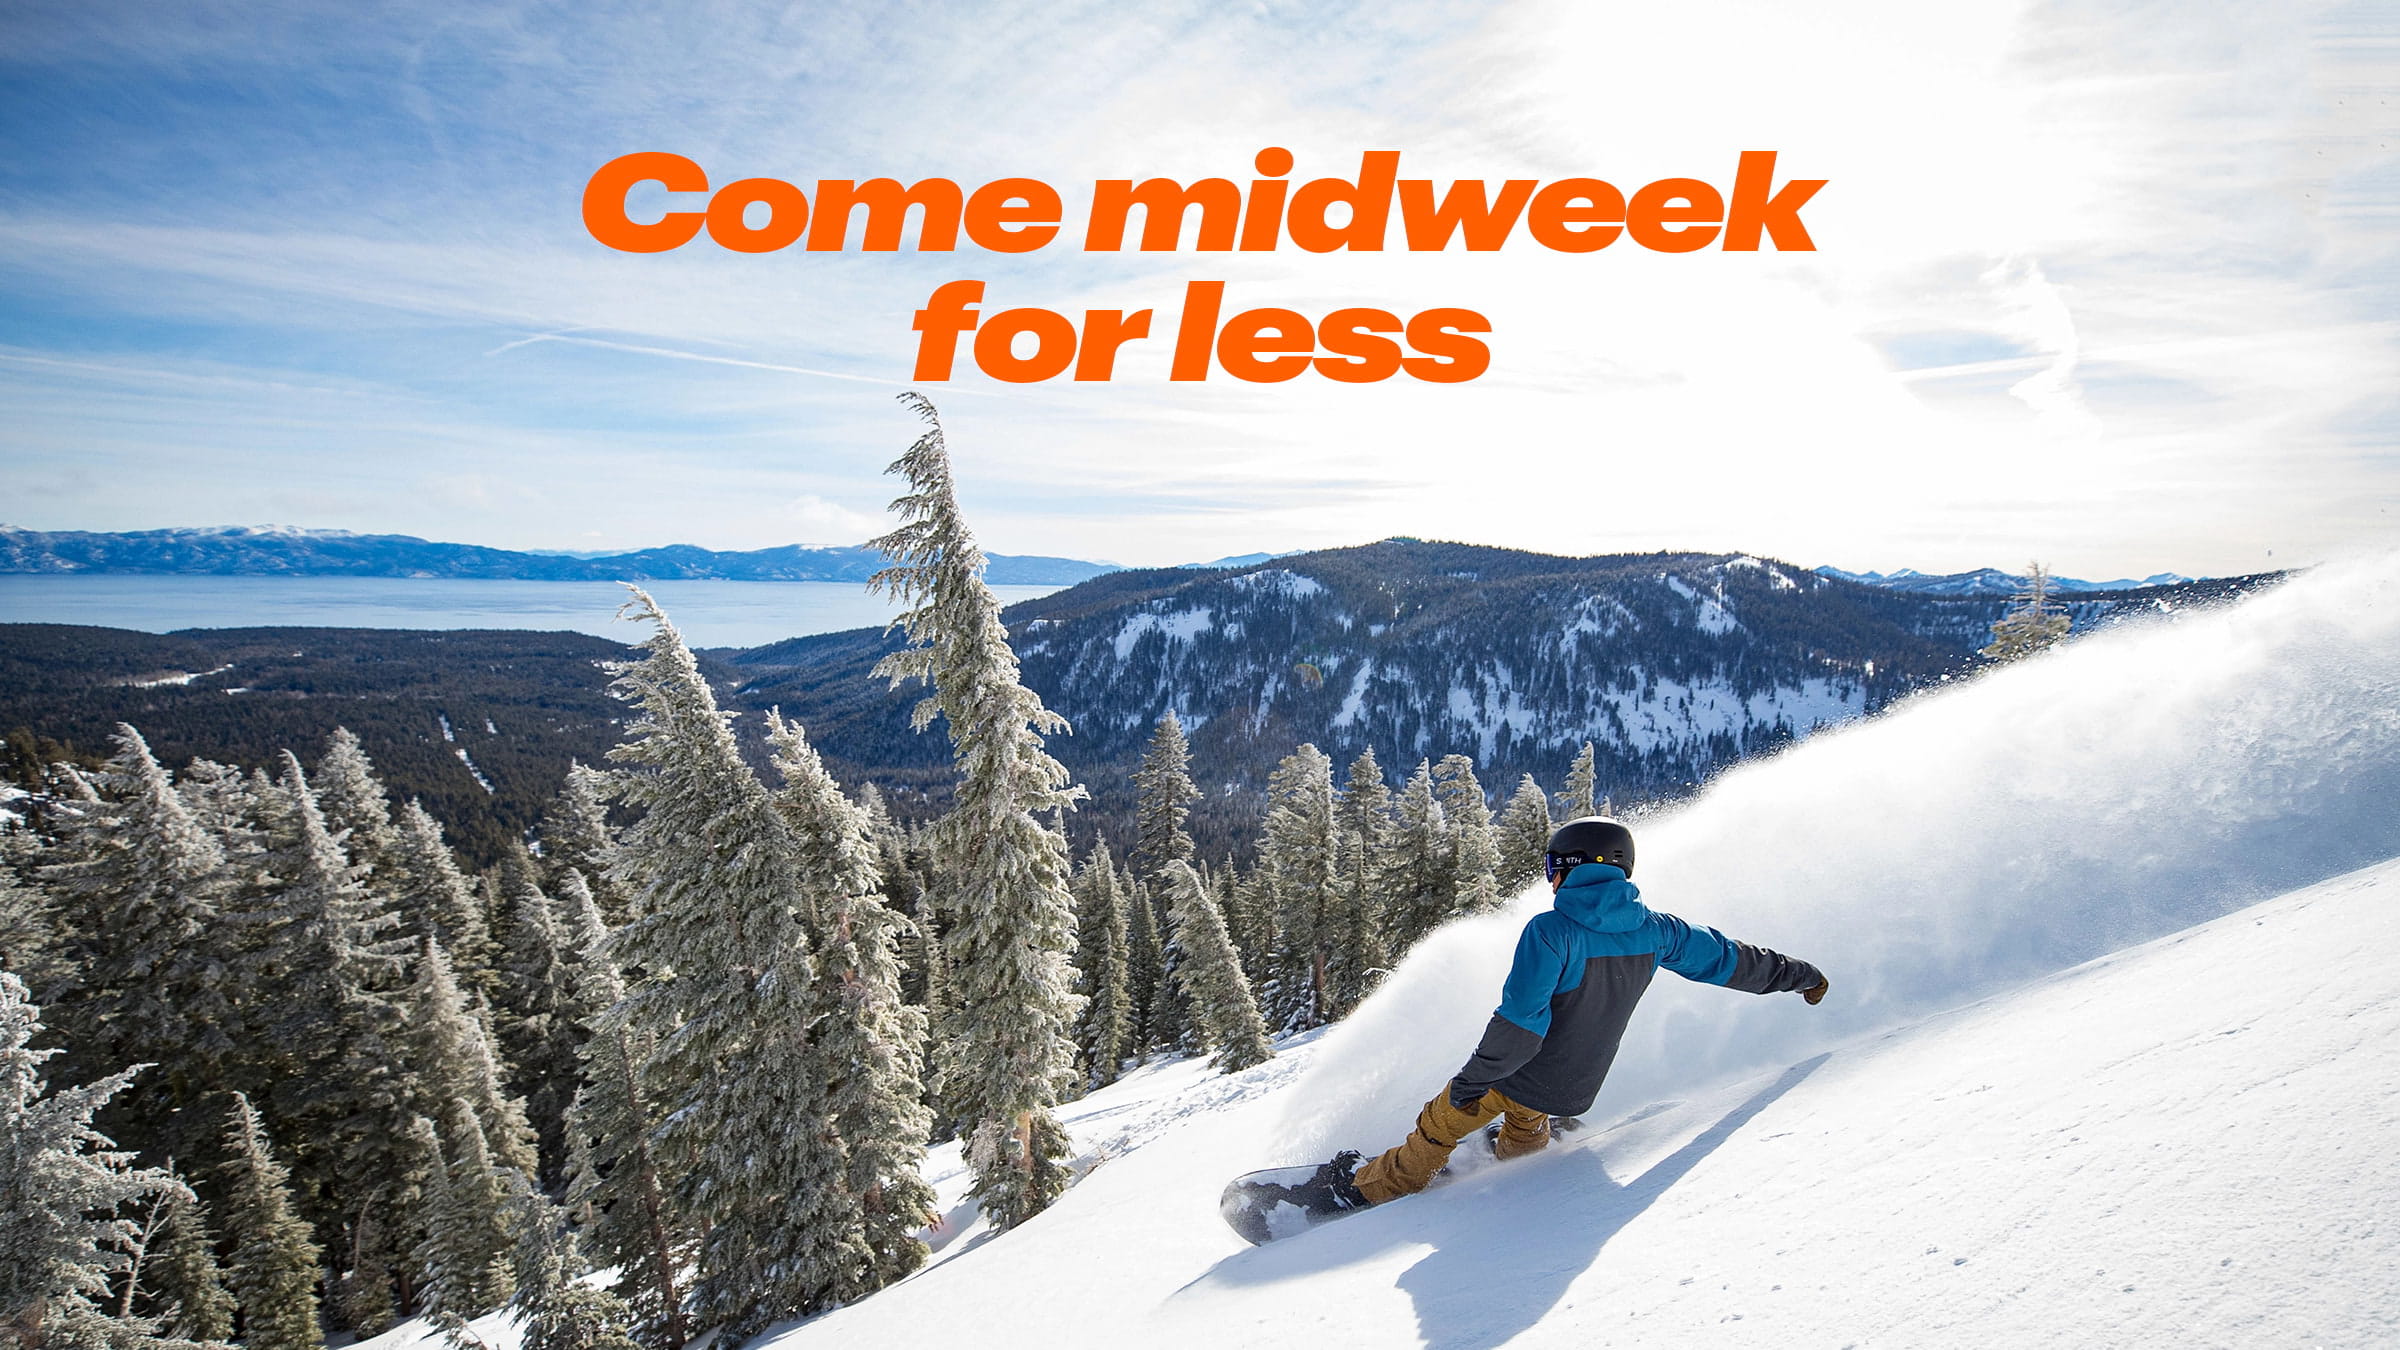 Snowboarder on a powder day at Palisades Tahoe with text overlay that says "Come midweek for less"